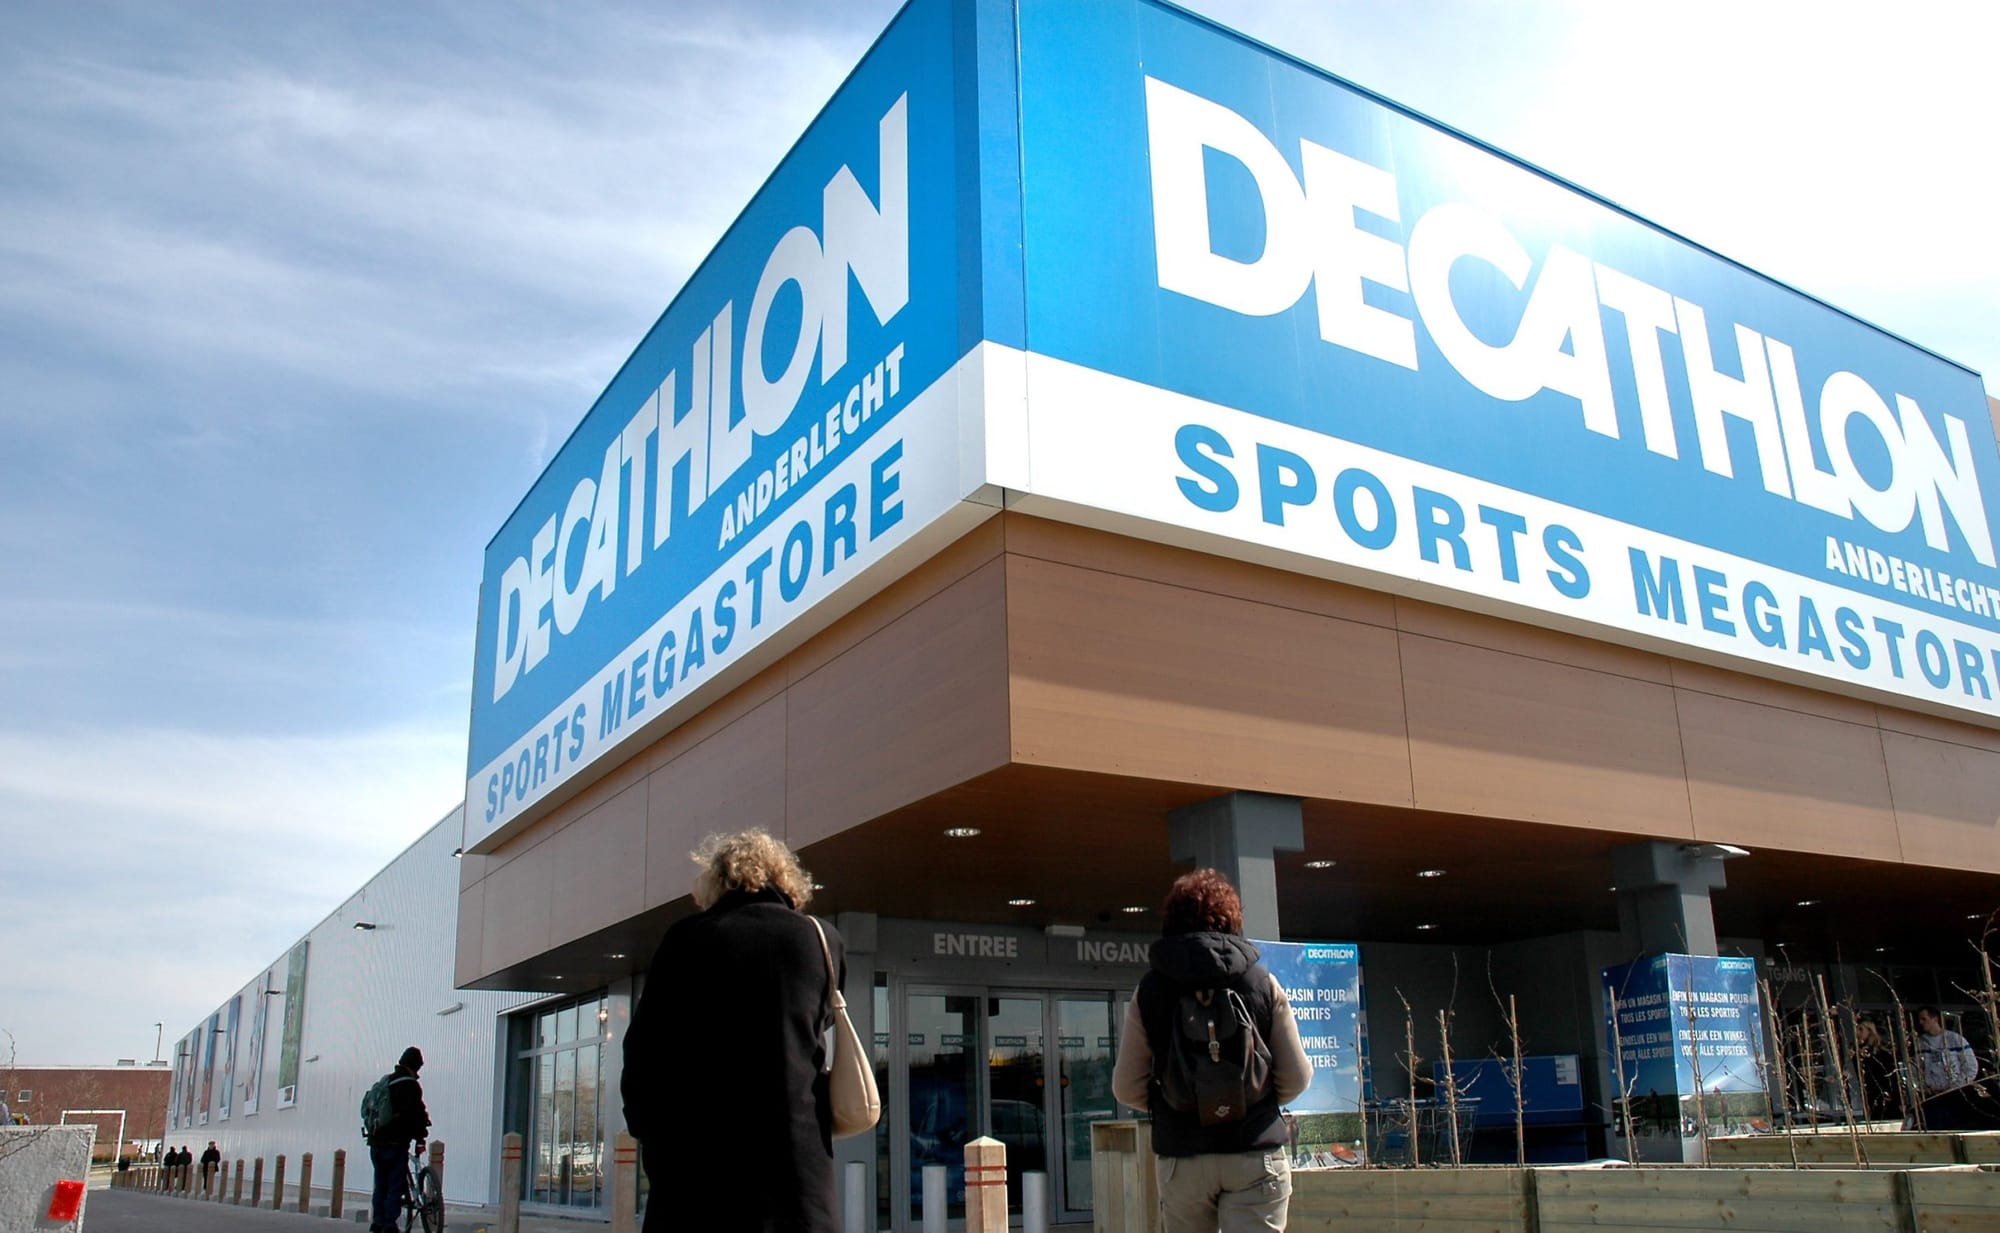 A decathlon store in the Netherlands